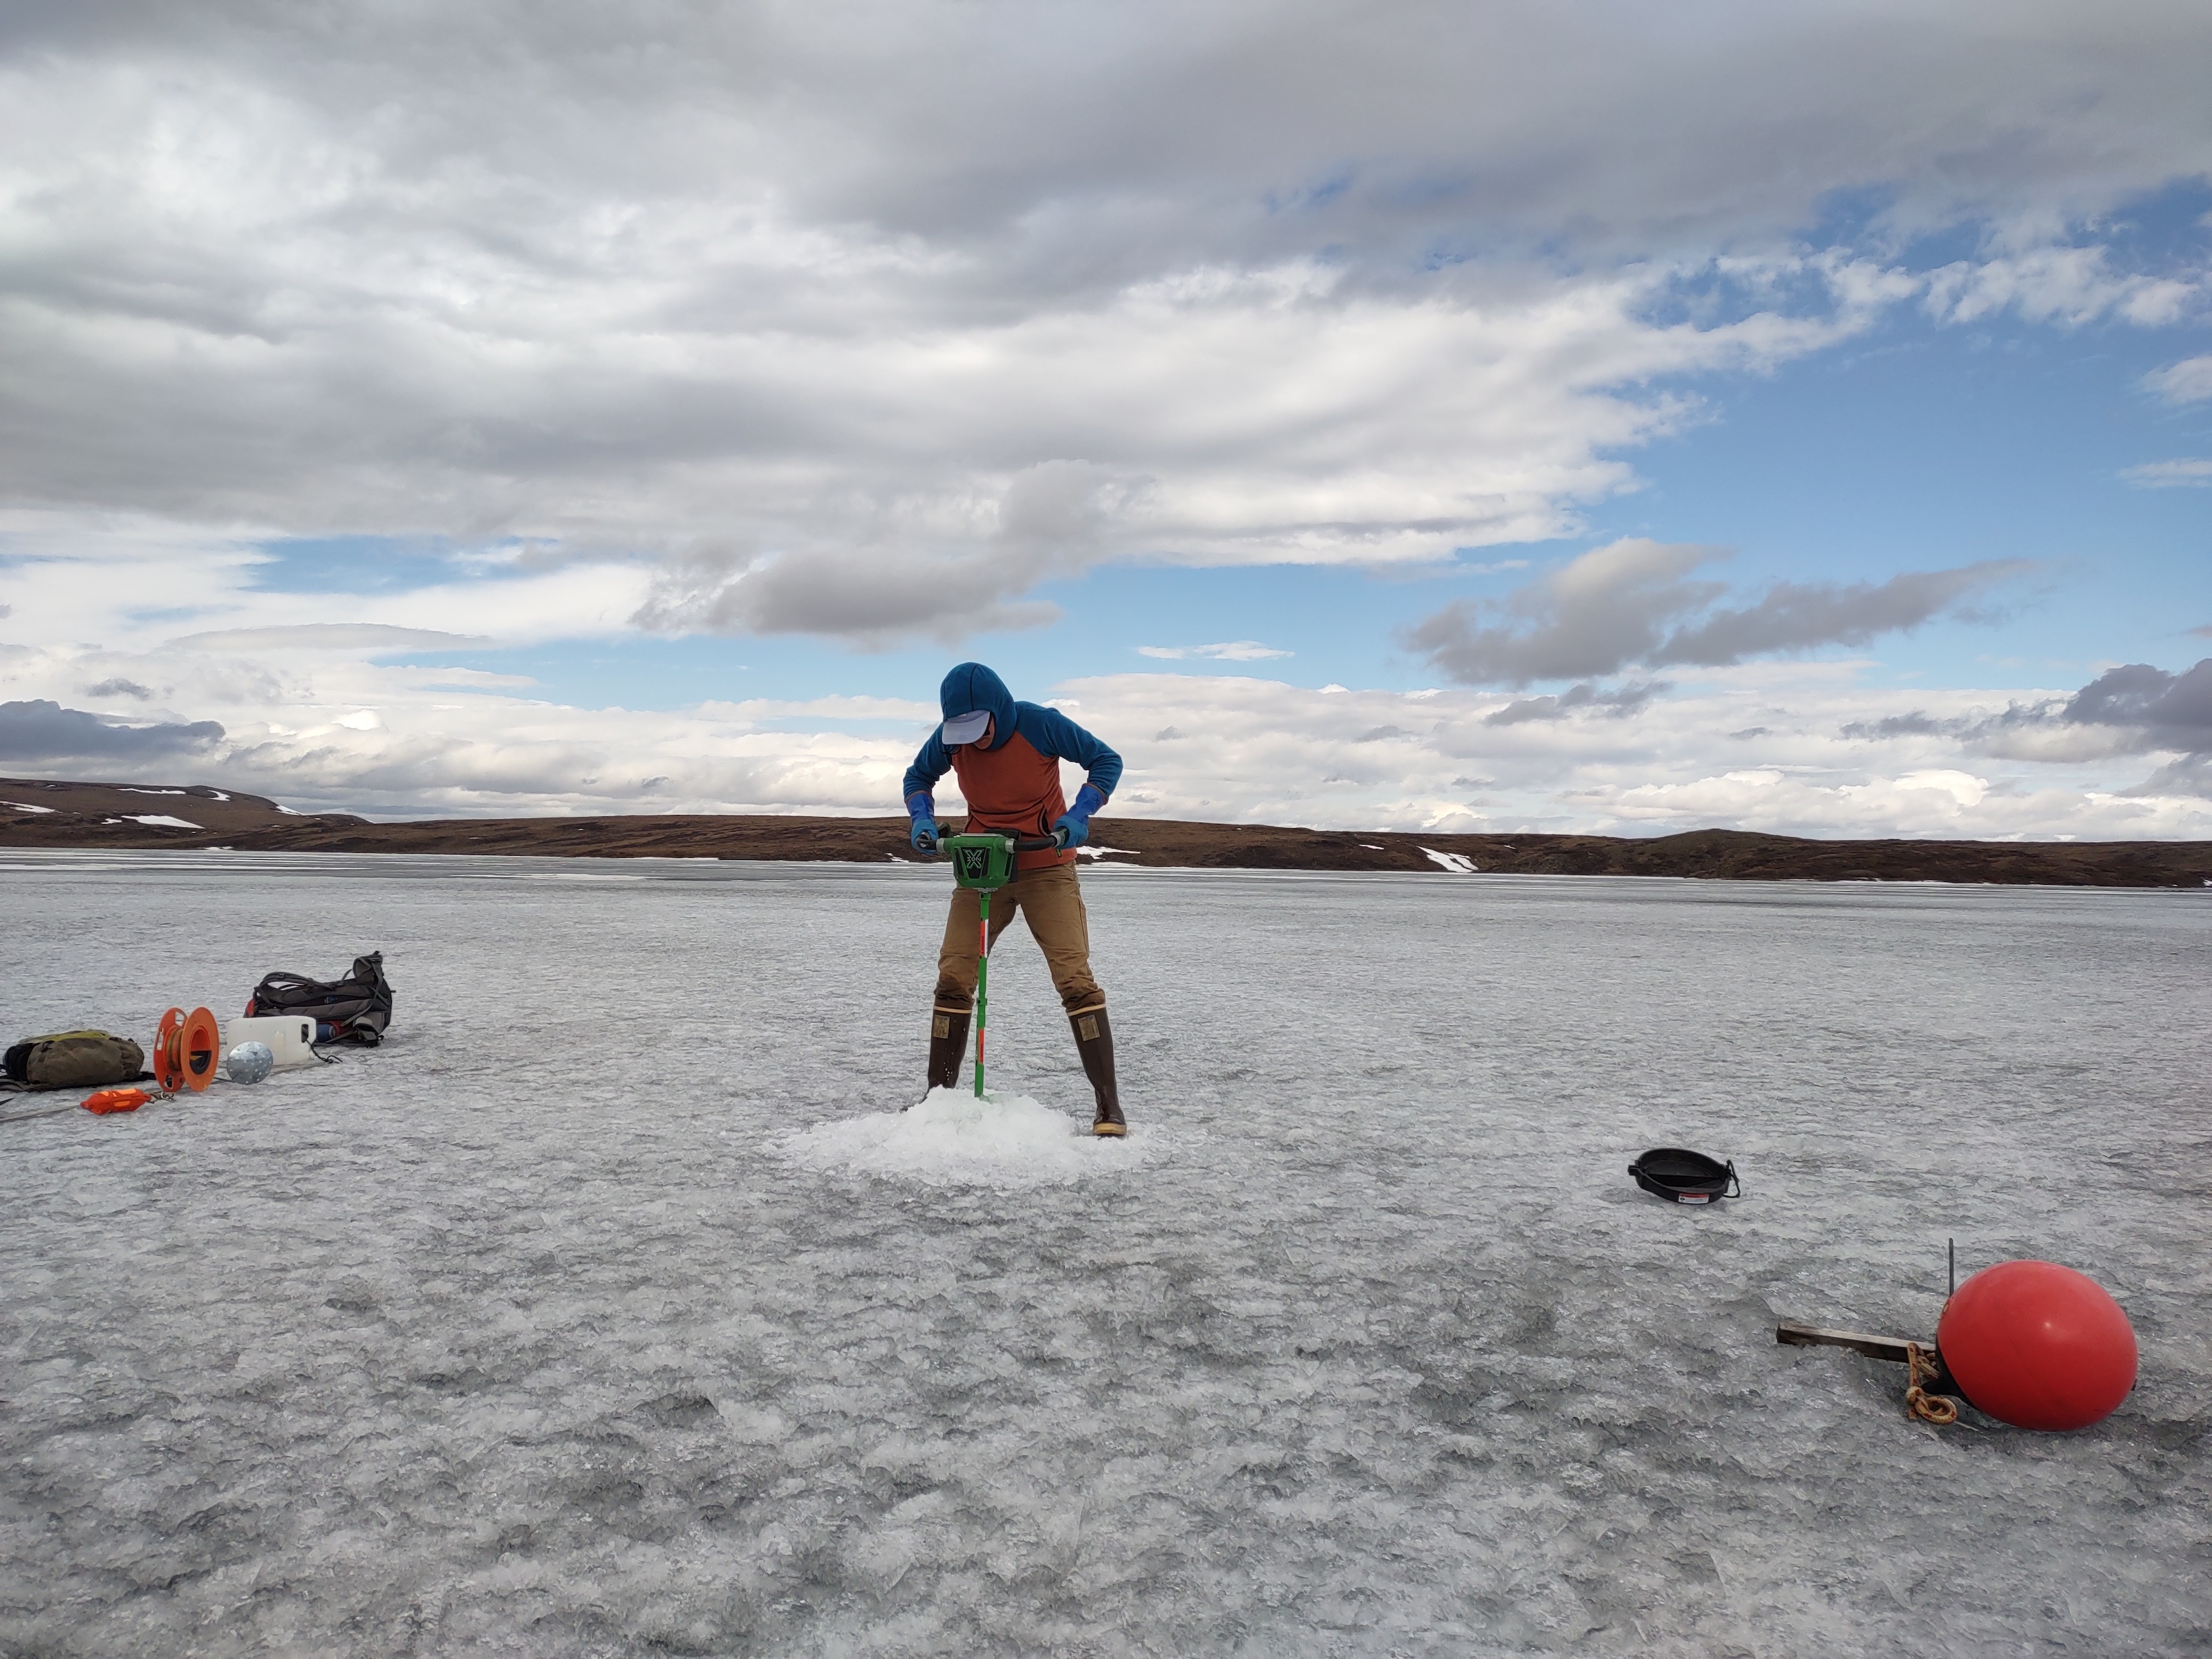 Photo by Amanda Young/Toolik Field Station
Toolik Field Station staff member Mayra Melendez Gonzalez drills into the ice on Toolik Lake to measure its thickness for long-term records in June 2022.